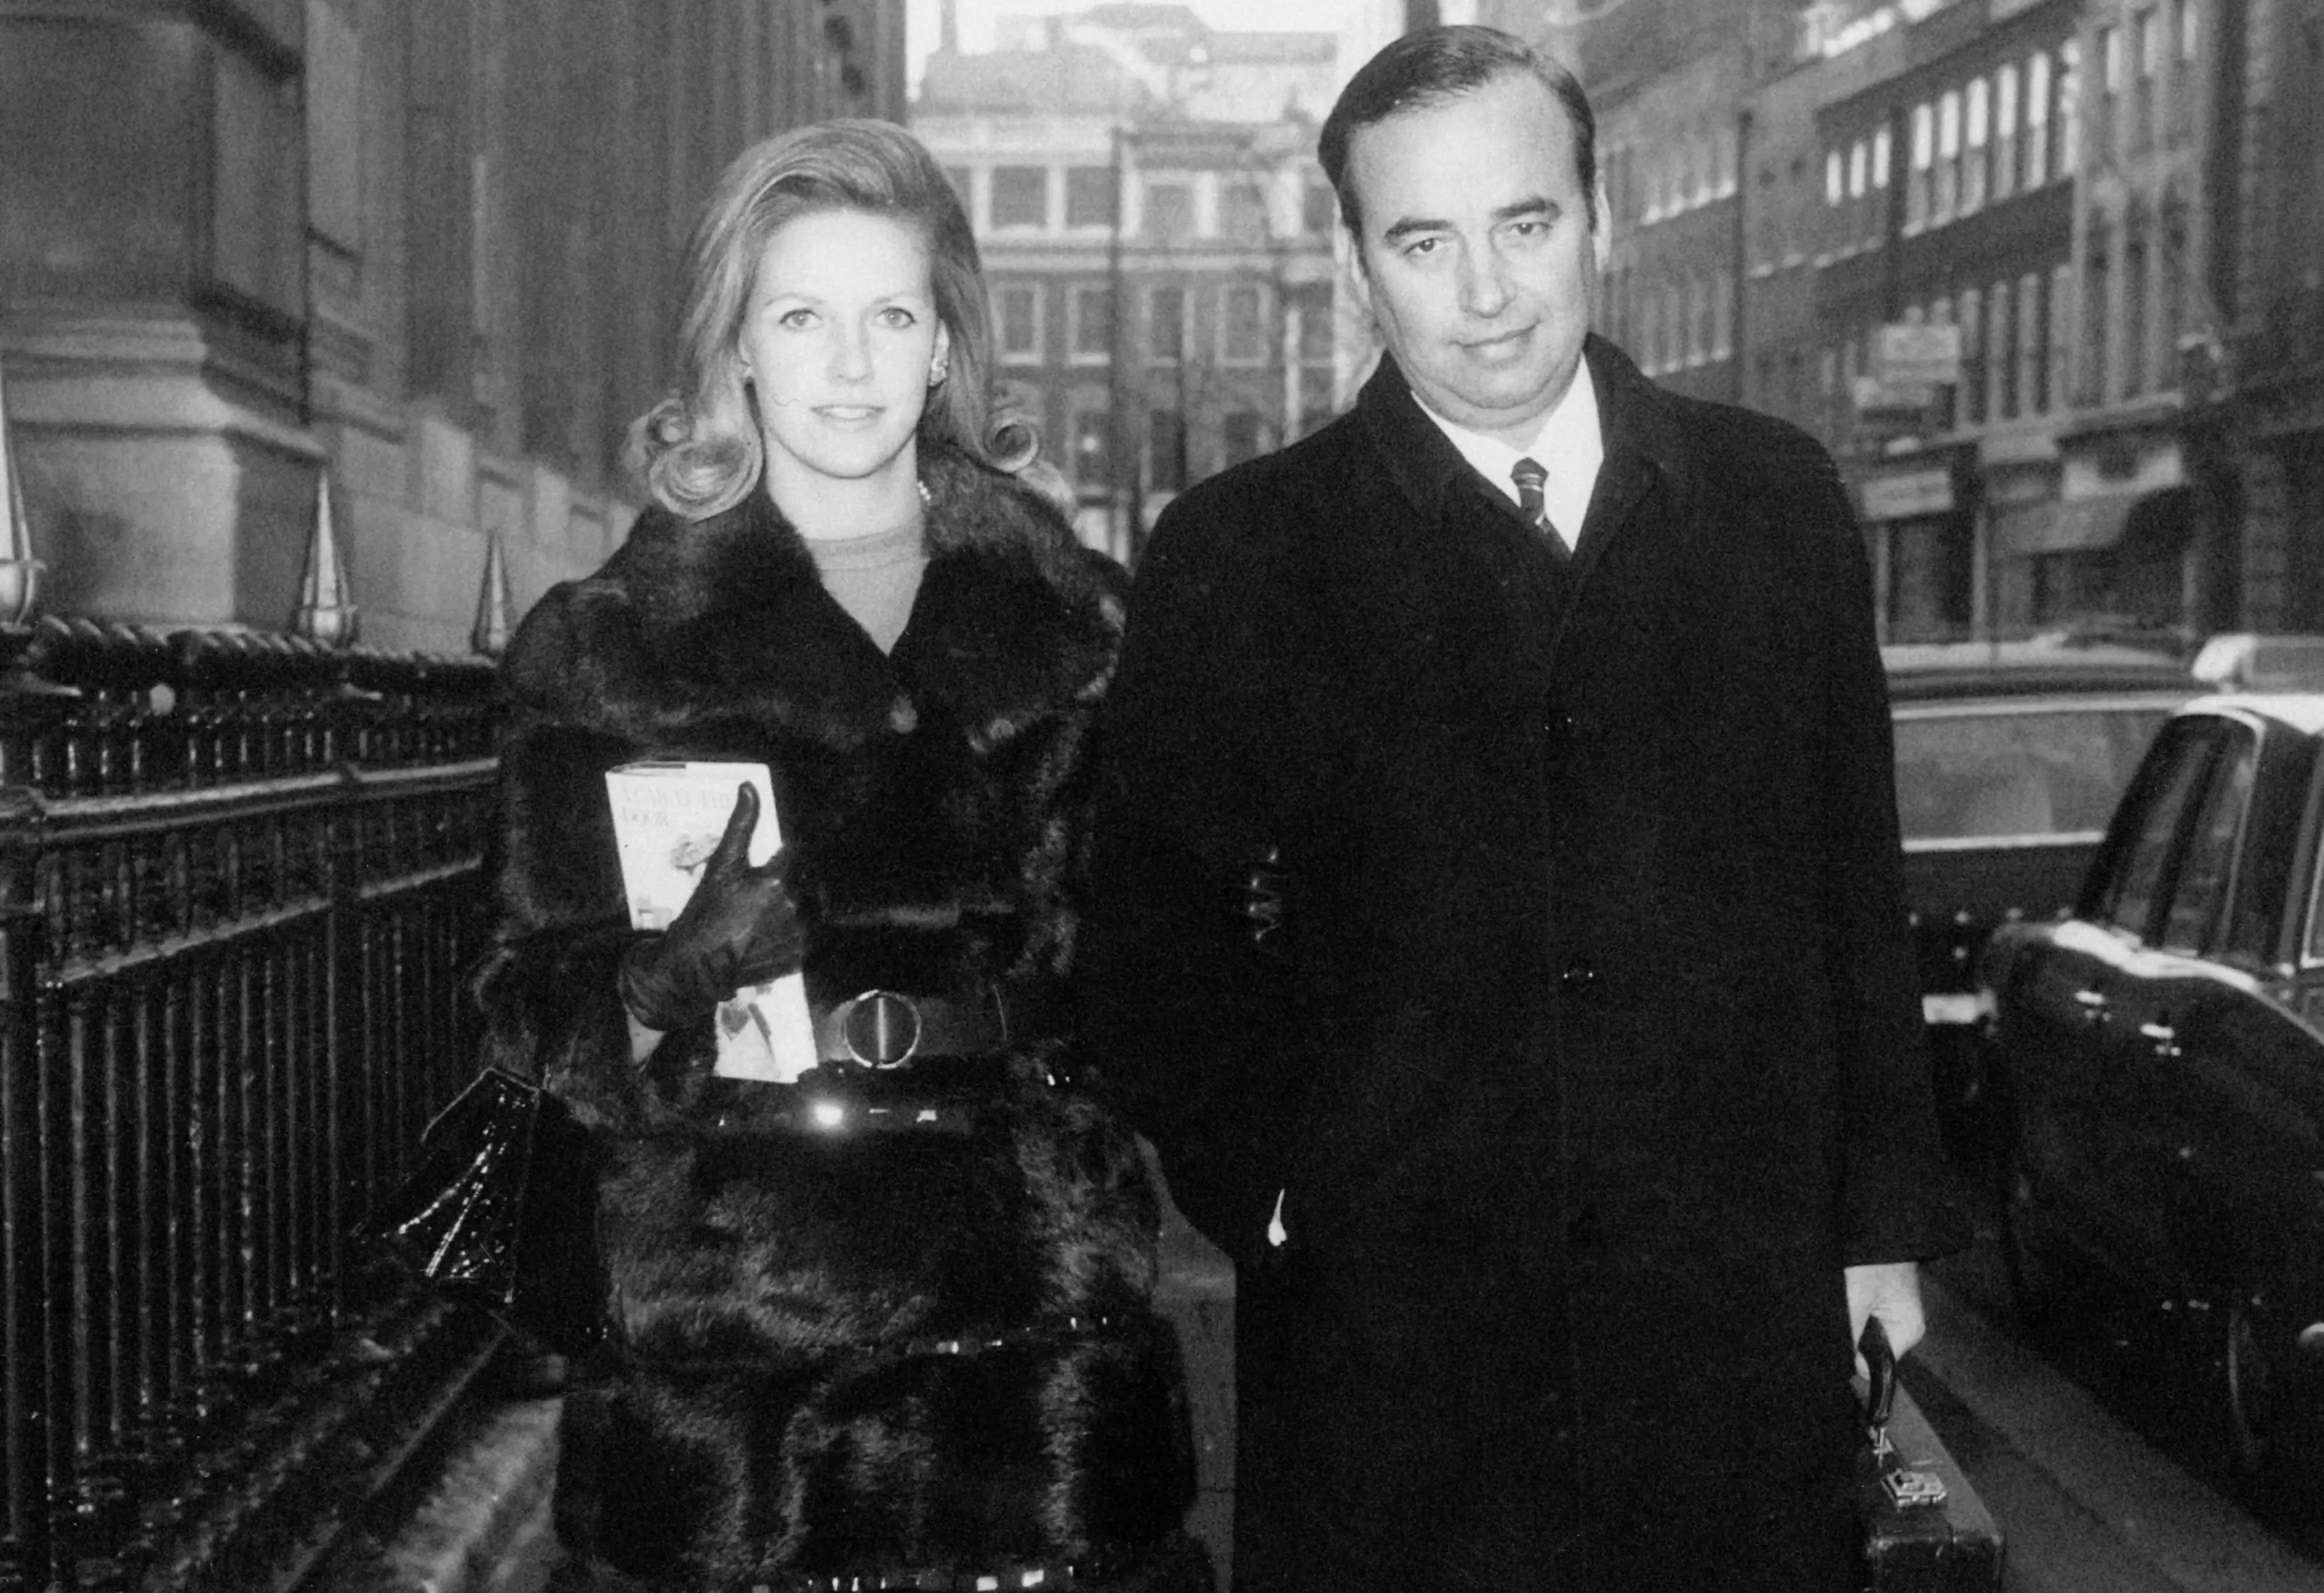 1Australian media mogul Rupert Murdoch arriving at the Connaught Rooms, London, with his second wife Anna Torv